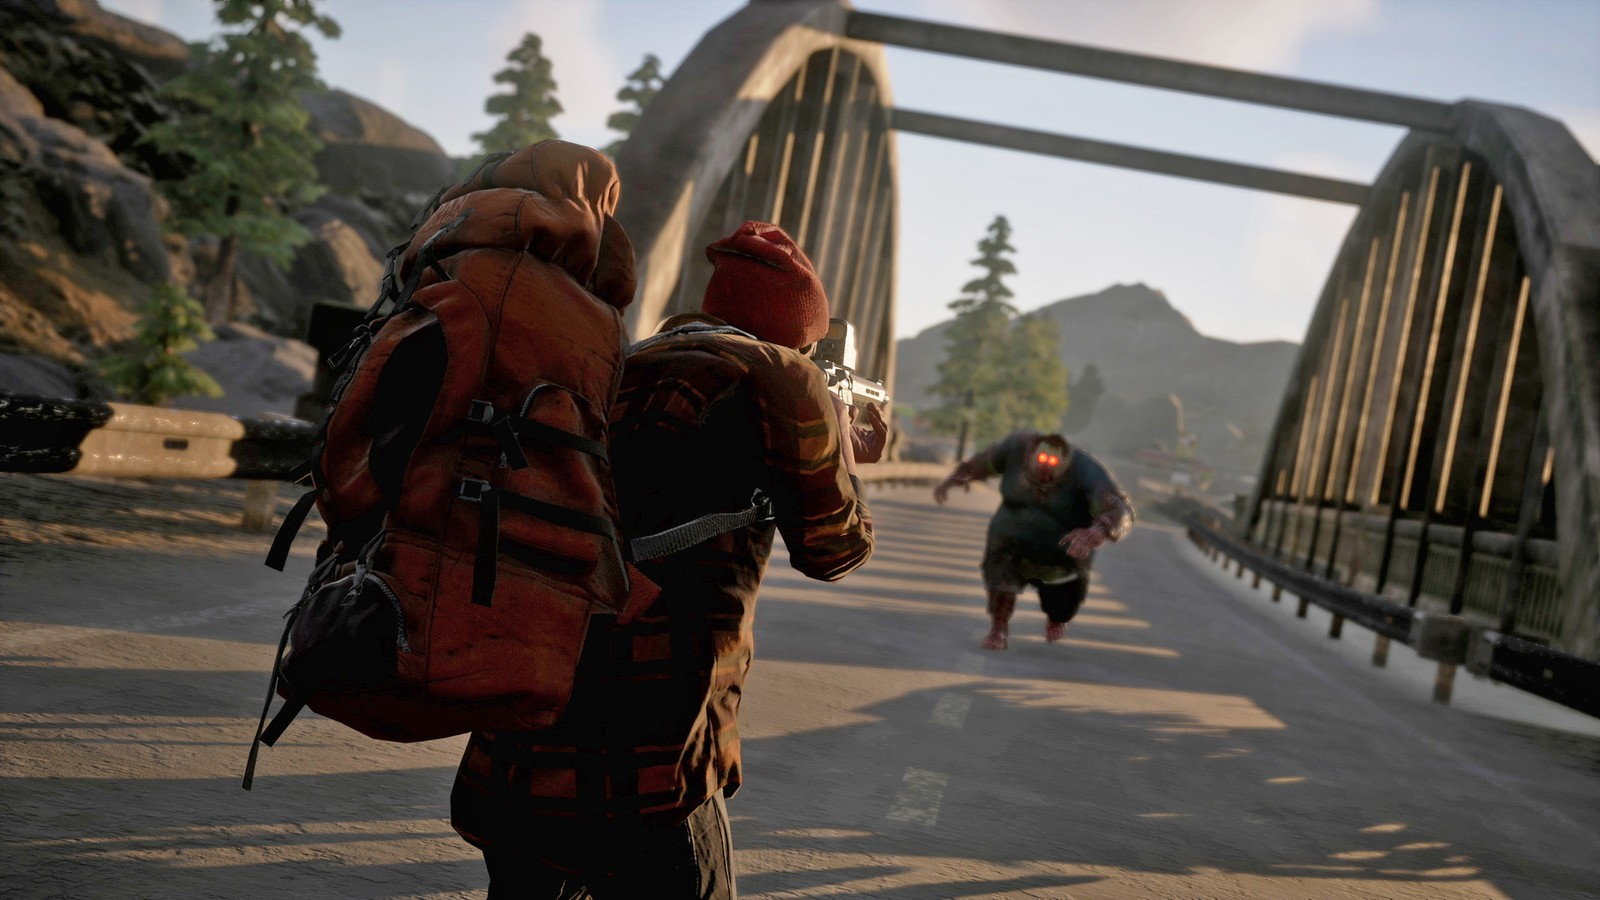 State Of Decay on X: Update 20: It's Go (Bag) Time is available